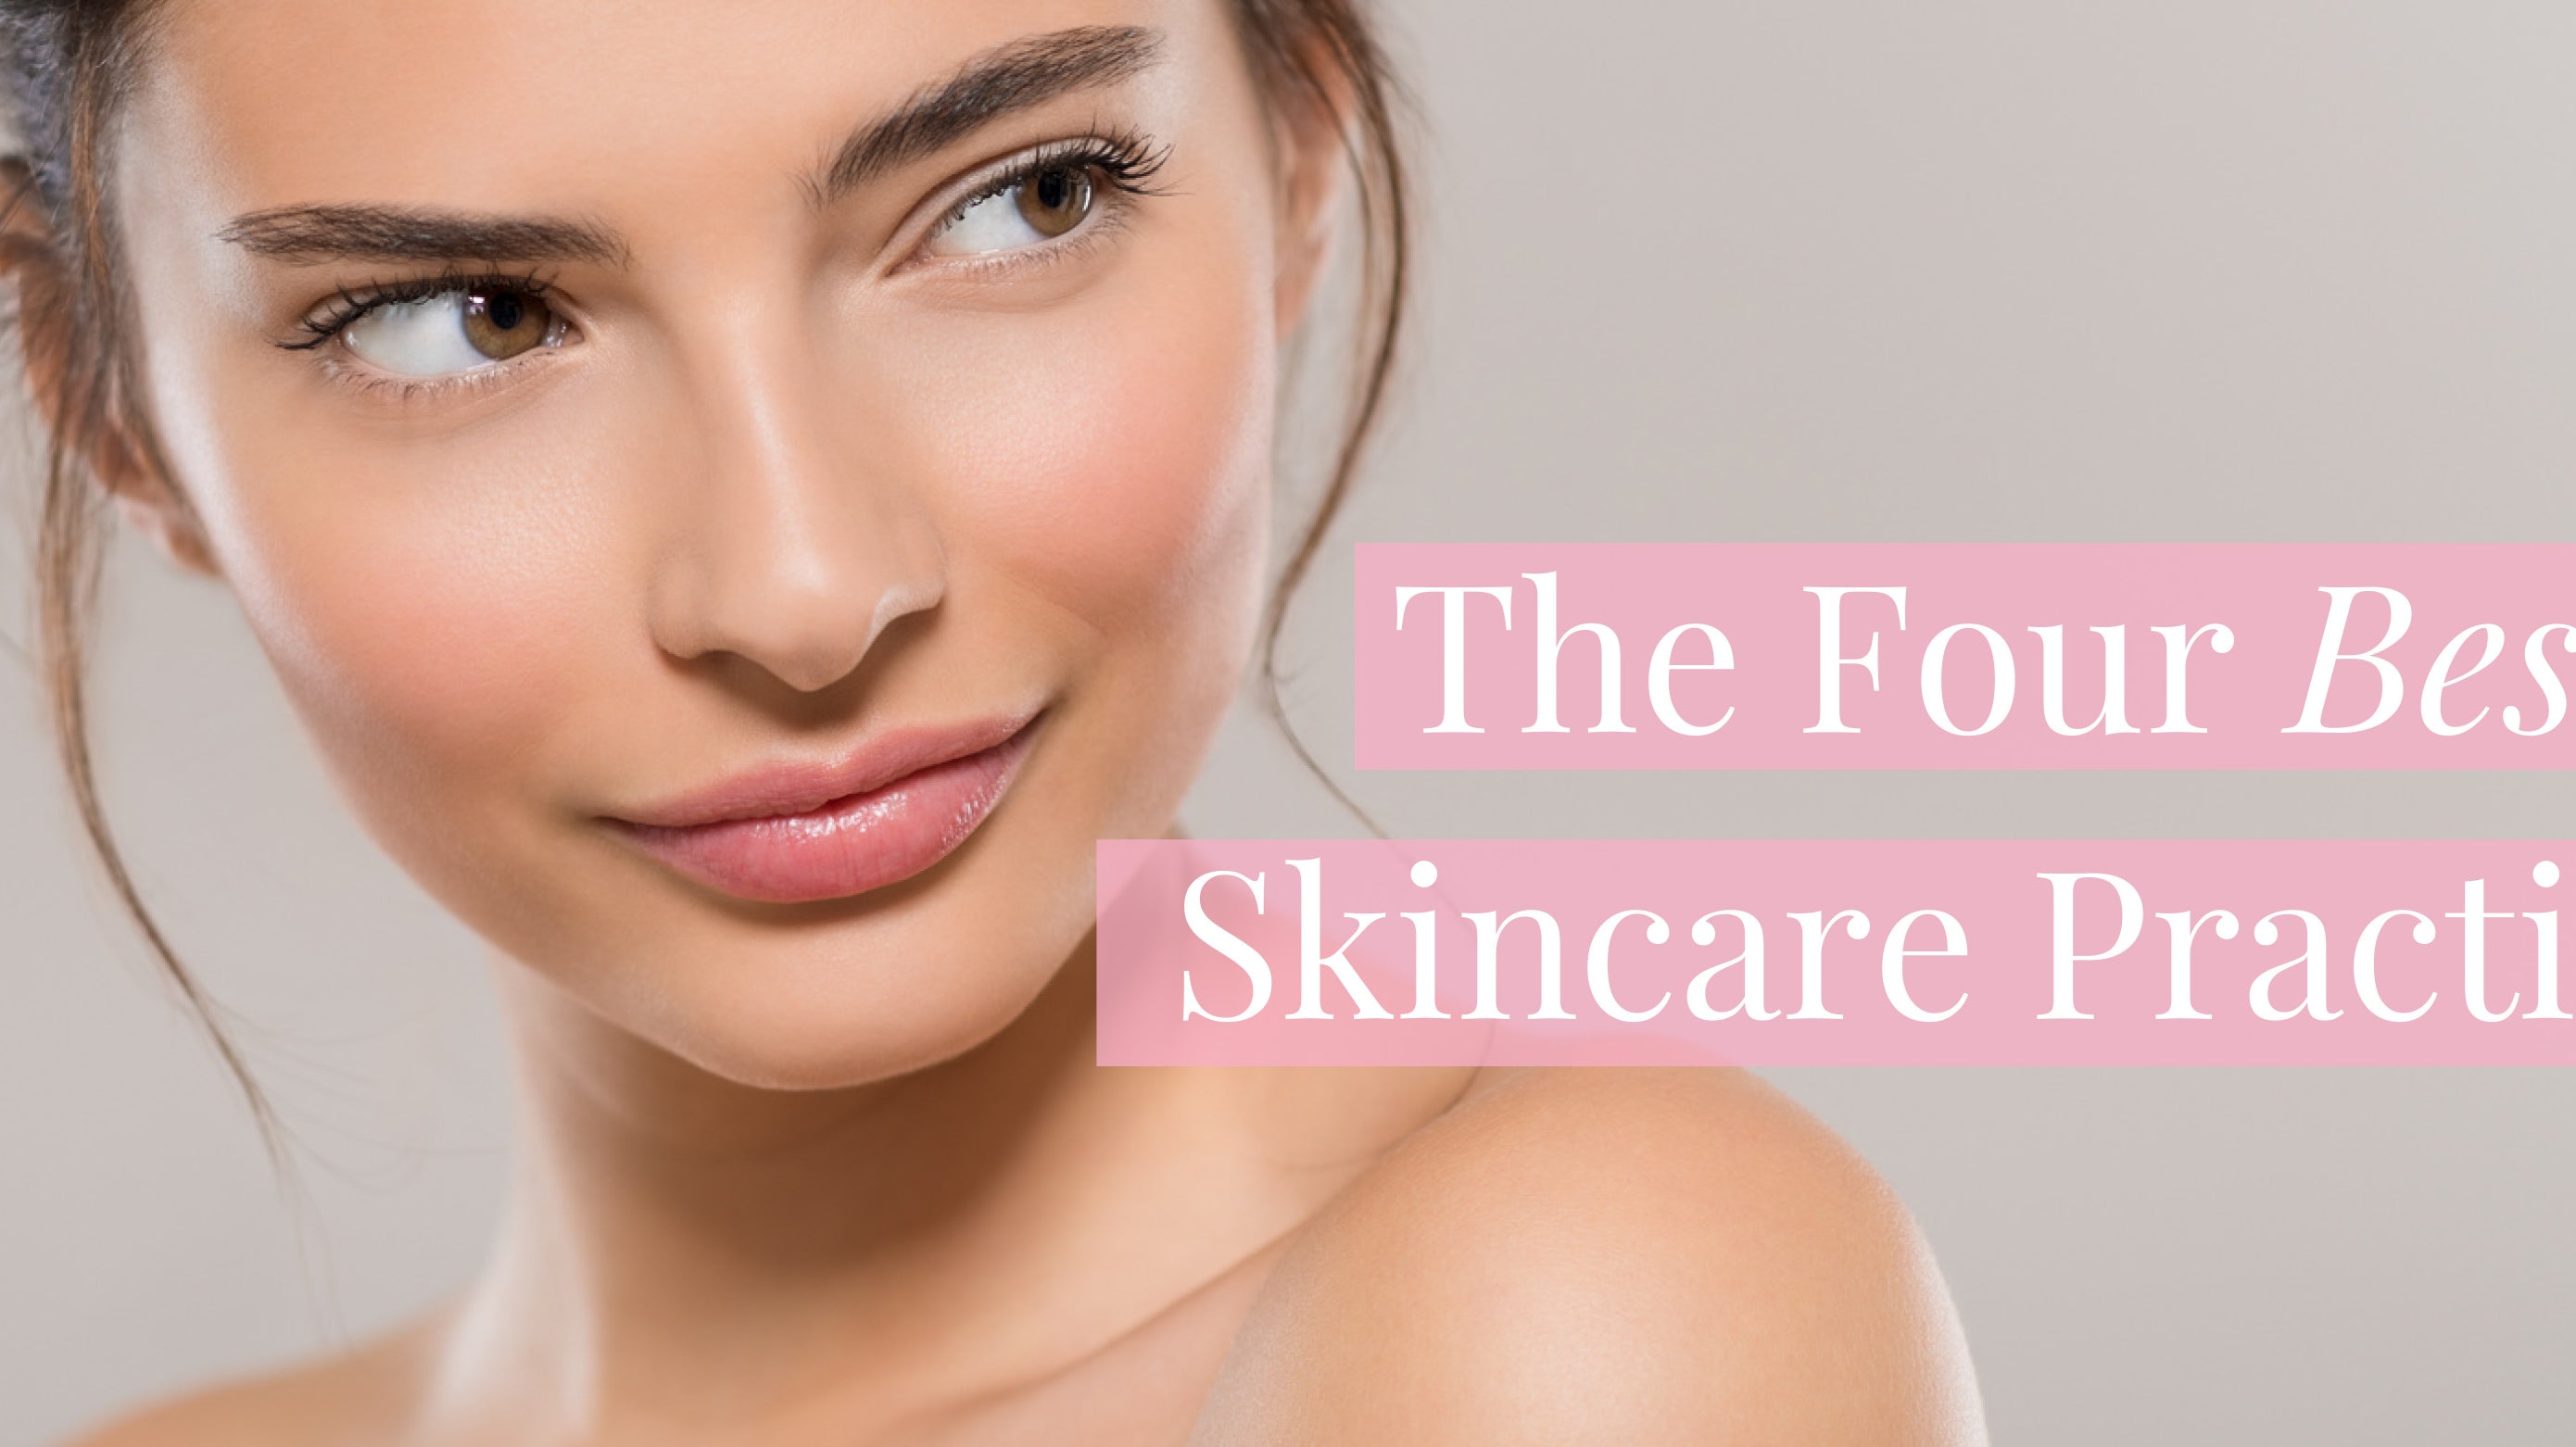 The Four Best Skincare Practices